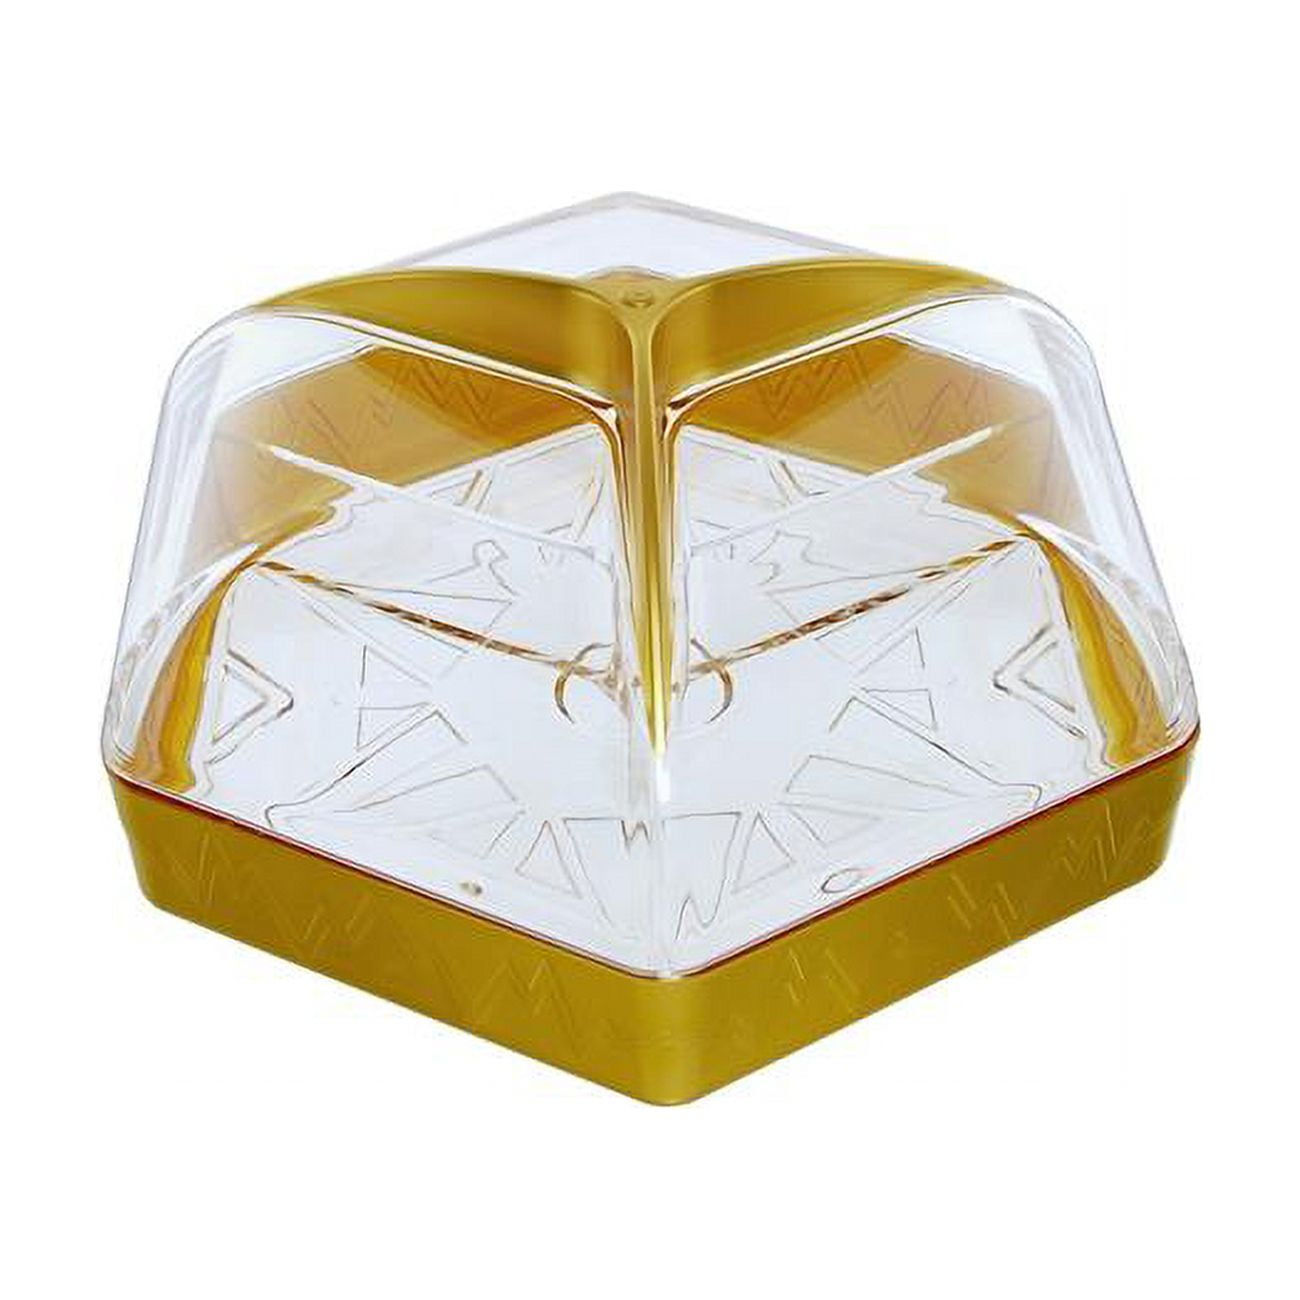 Picture of Brilliant Gifts B2013.027.G0 8.5 in. Gold Acrylic 3 Section Set with Lid